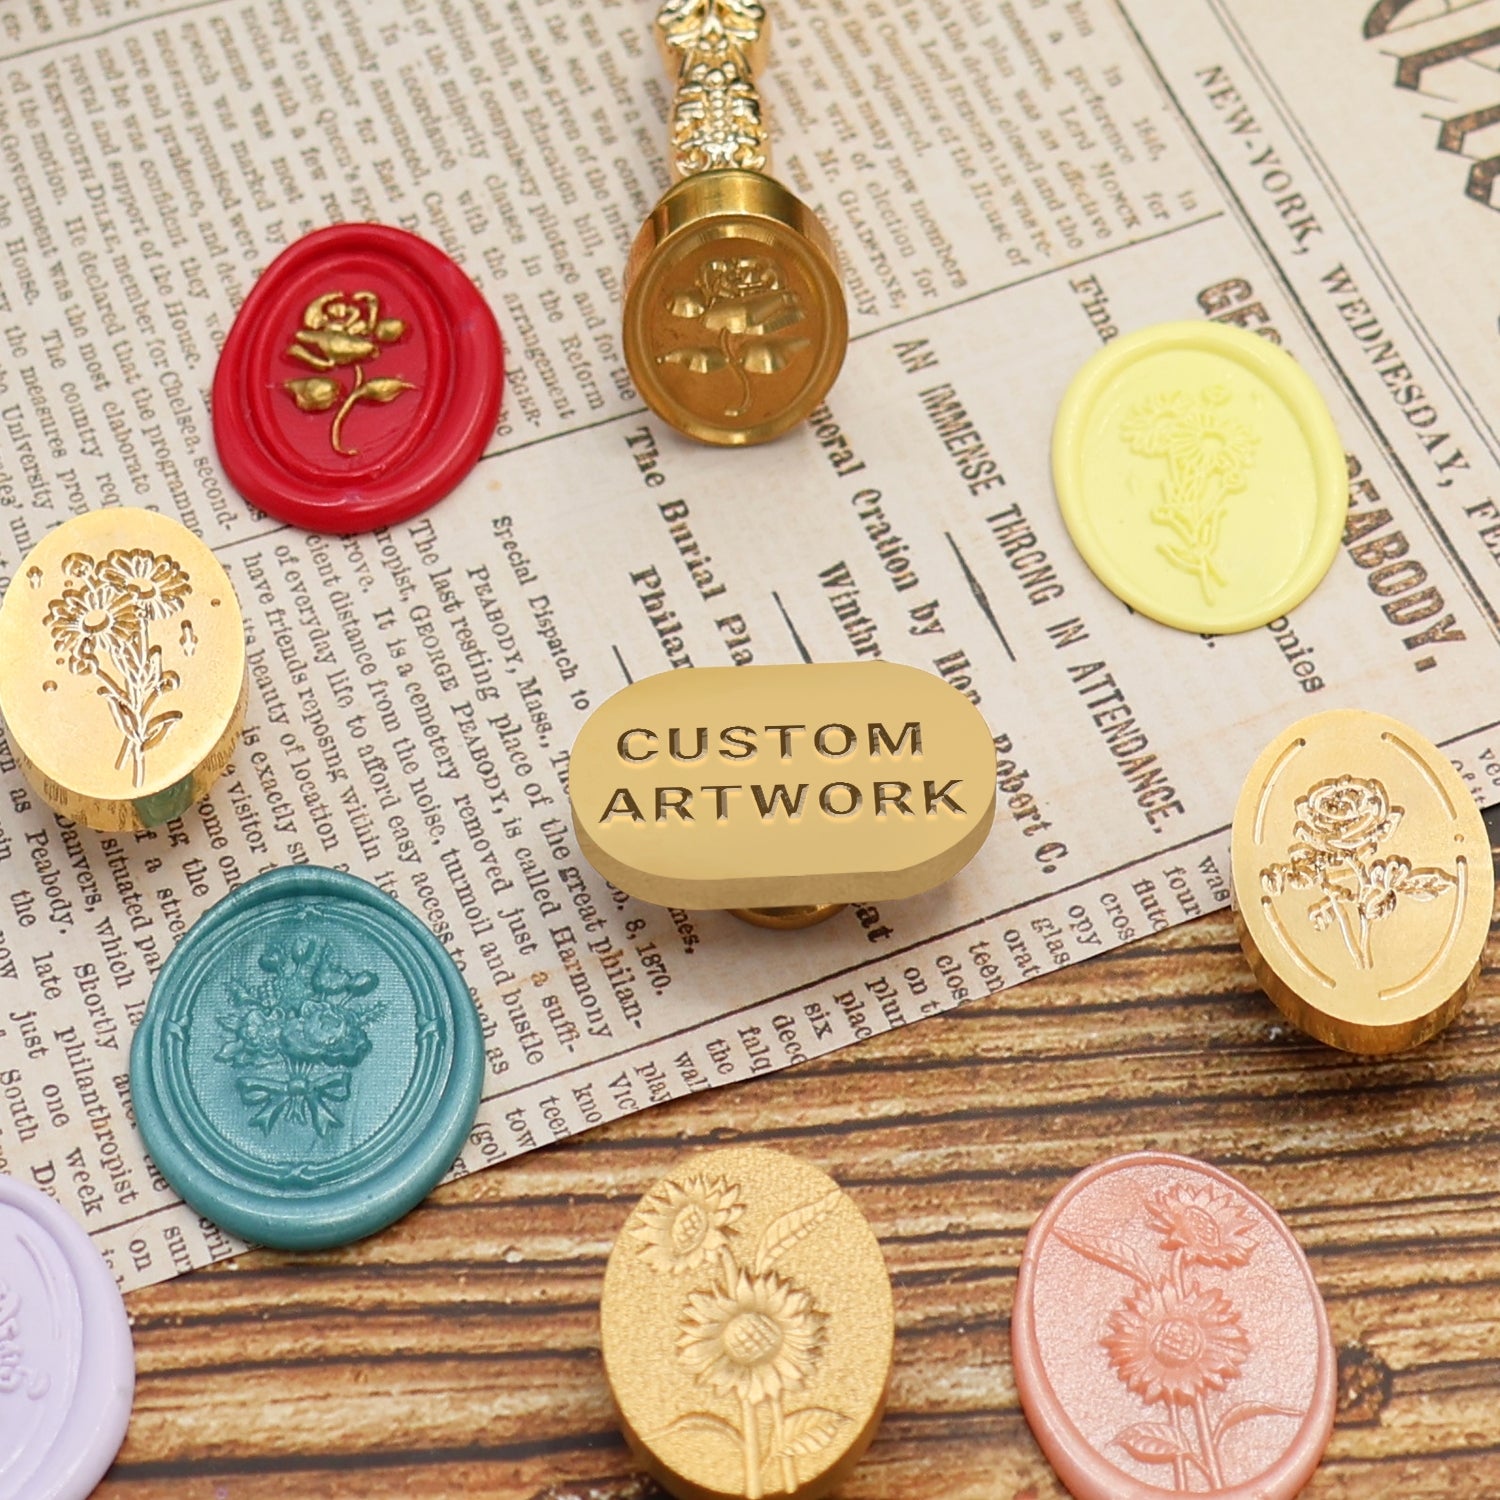 Custom Wax Seal Stamp - Oval Fully Customized Wax Seal Stamp with Your Own Artwork